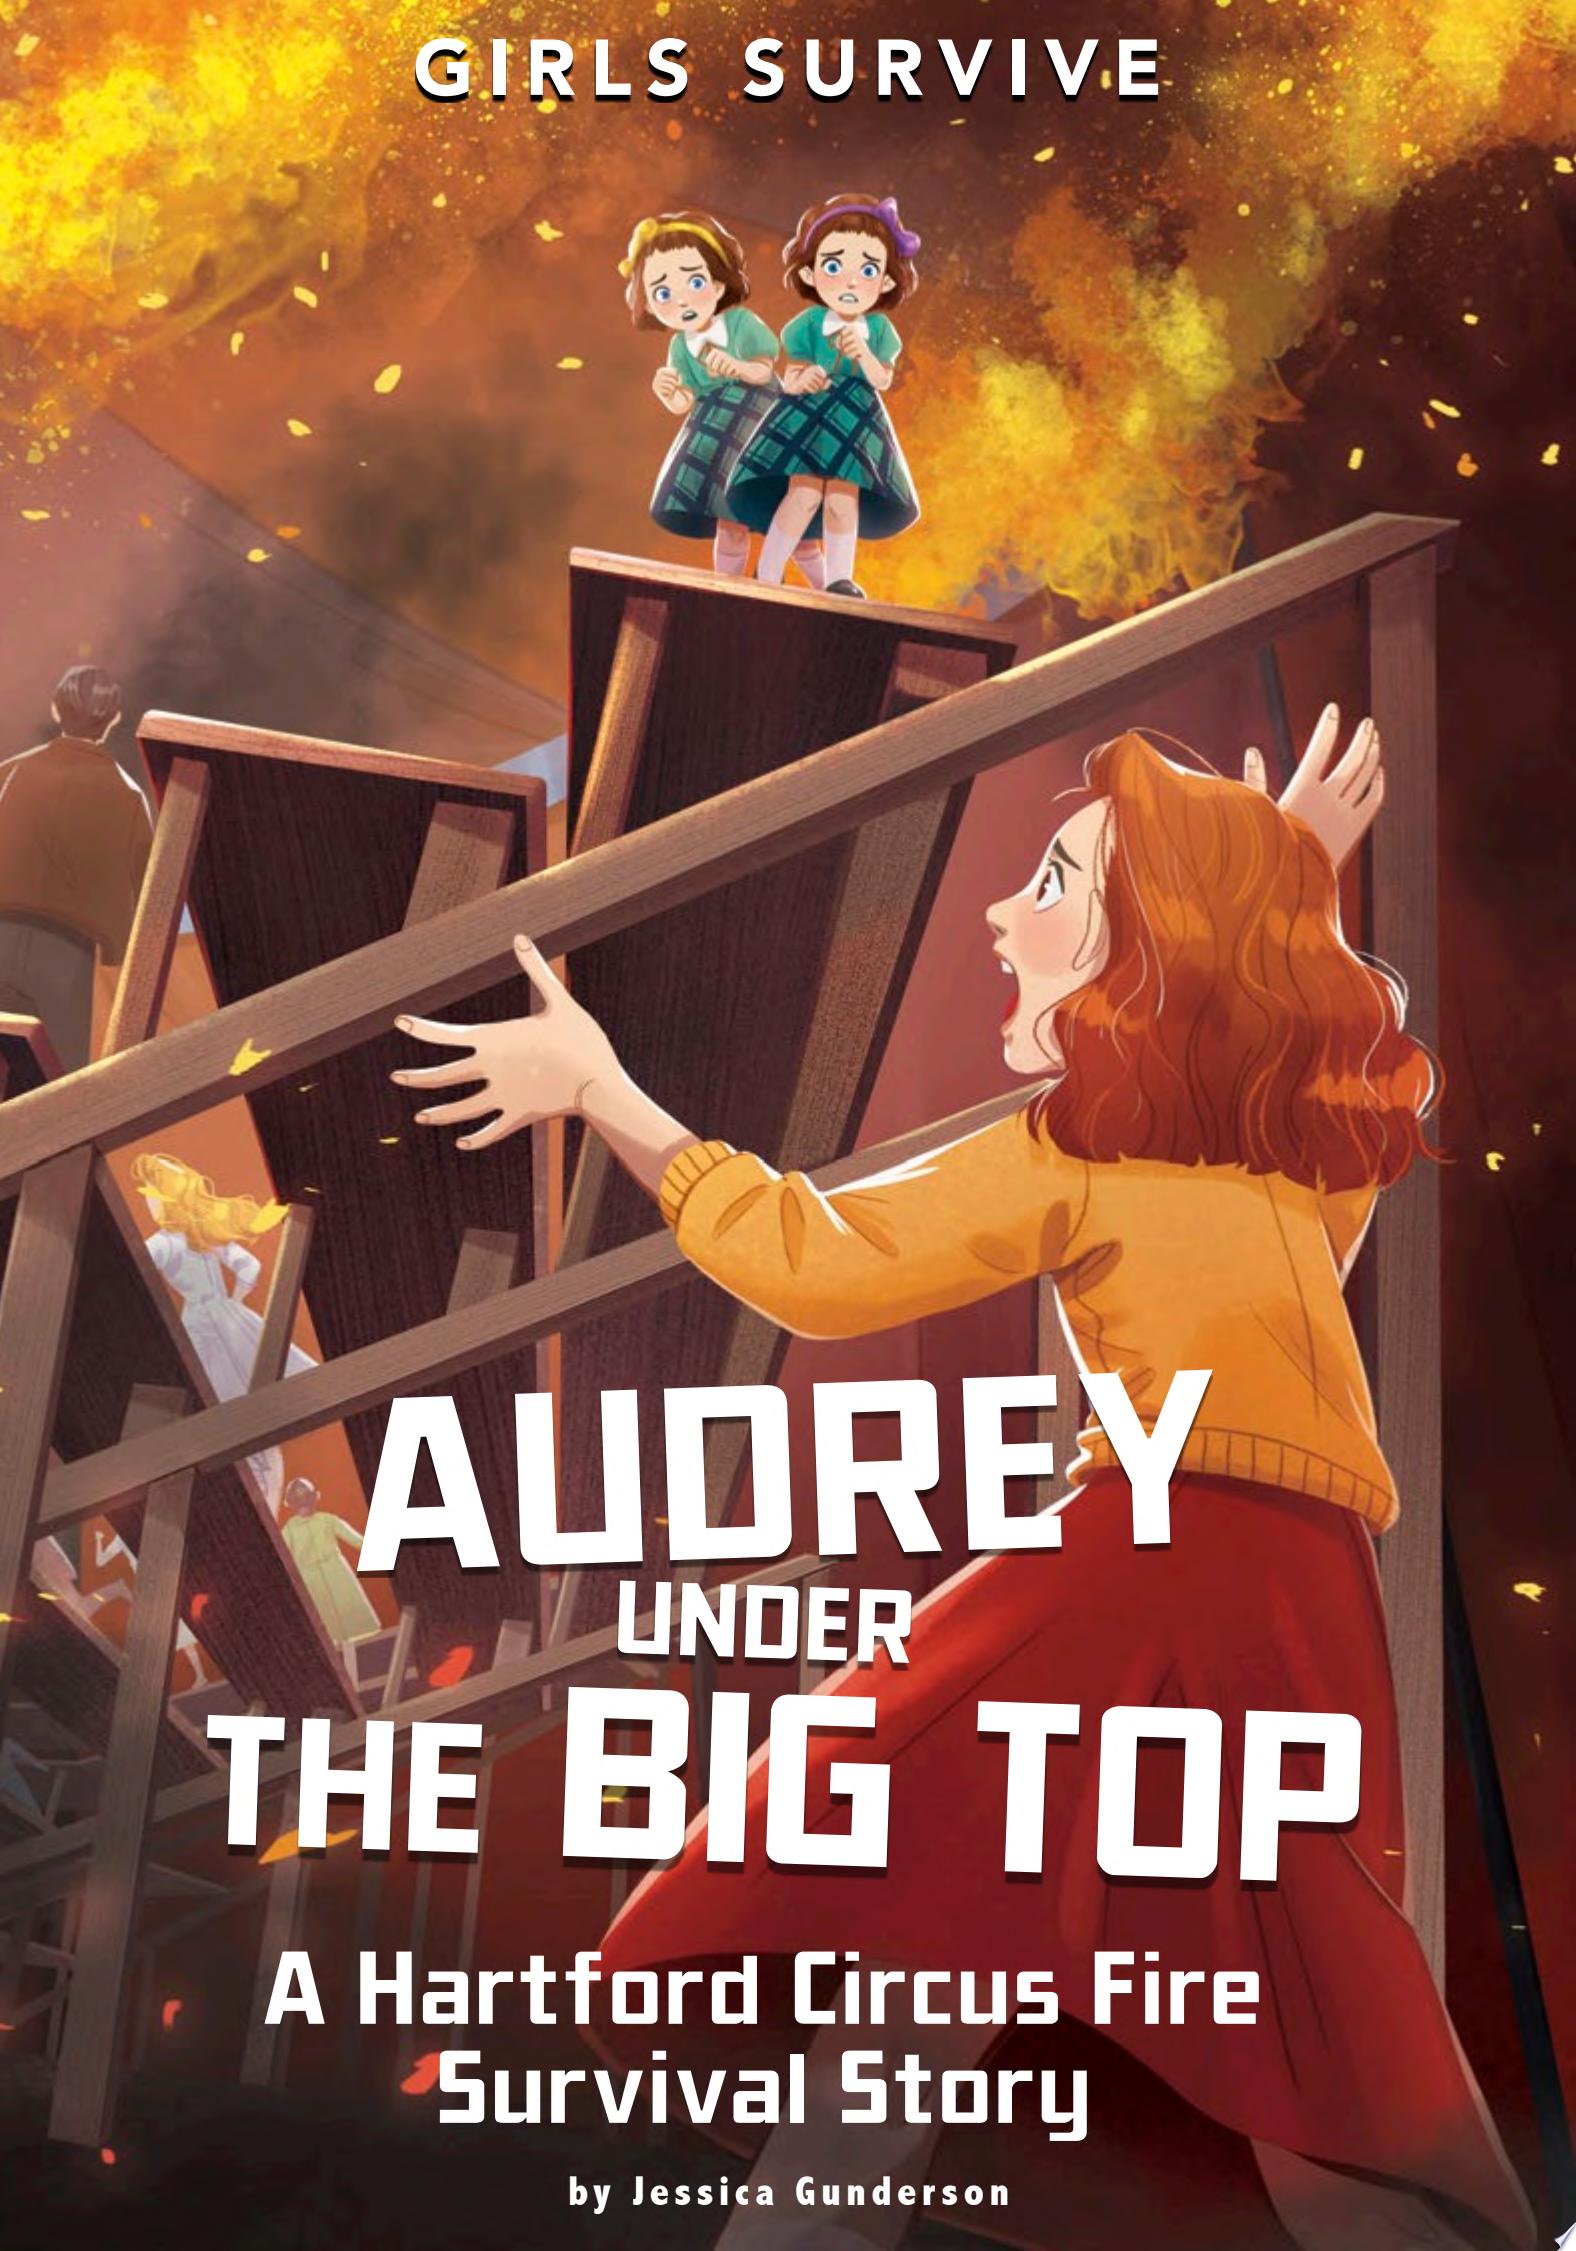 Image for "Audrey Under the Big Top"